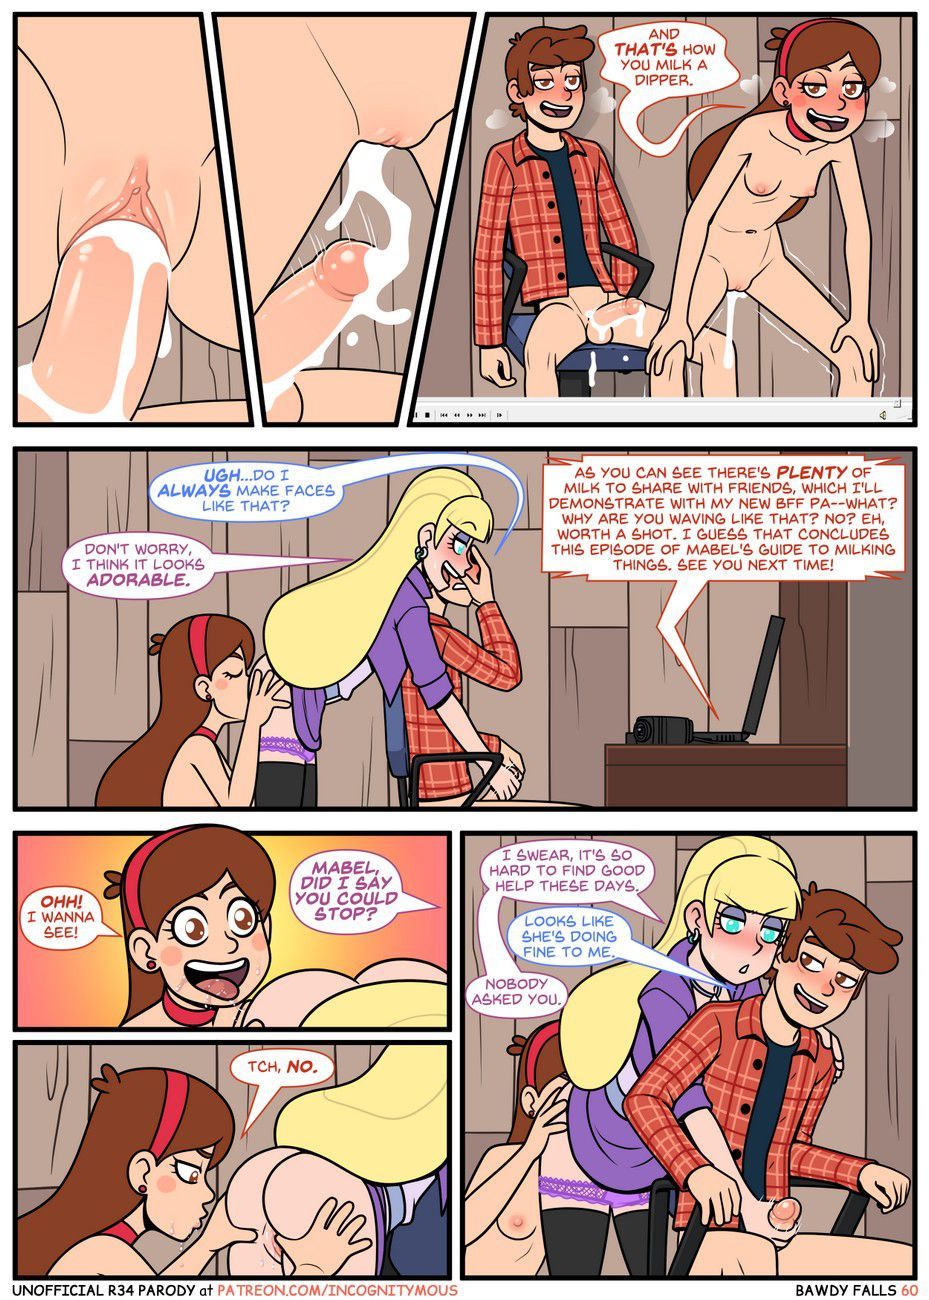 [Incognitymous] Bawdy Falls (Gravity Falls) ongoing 61